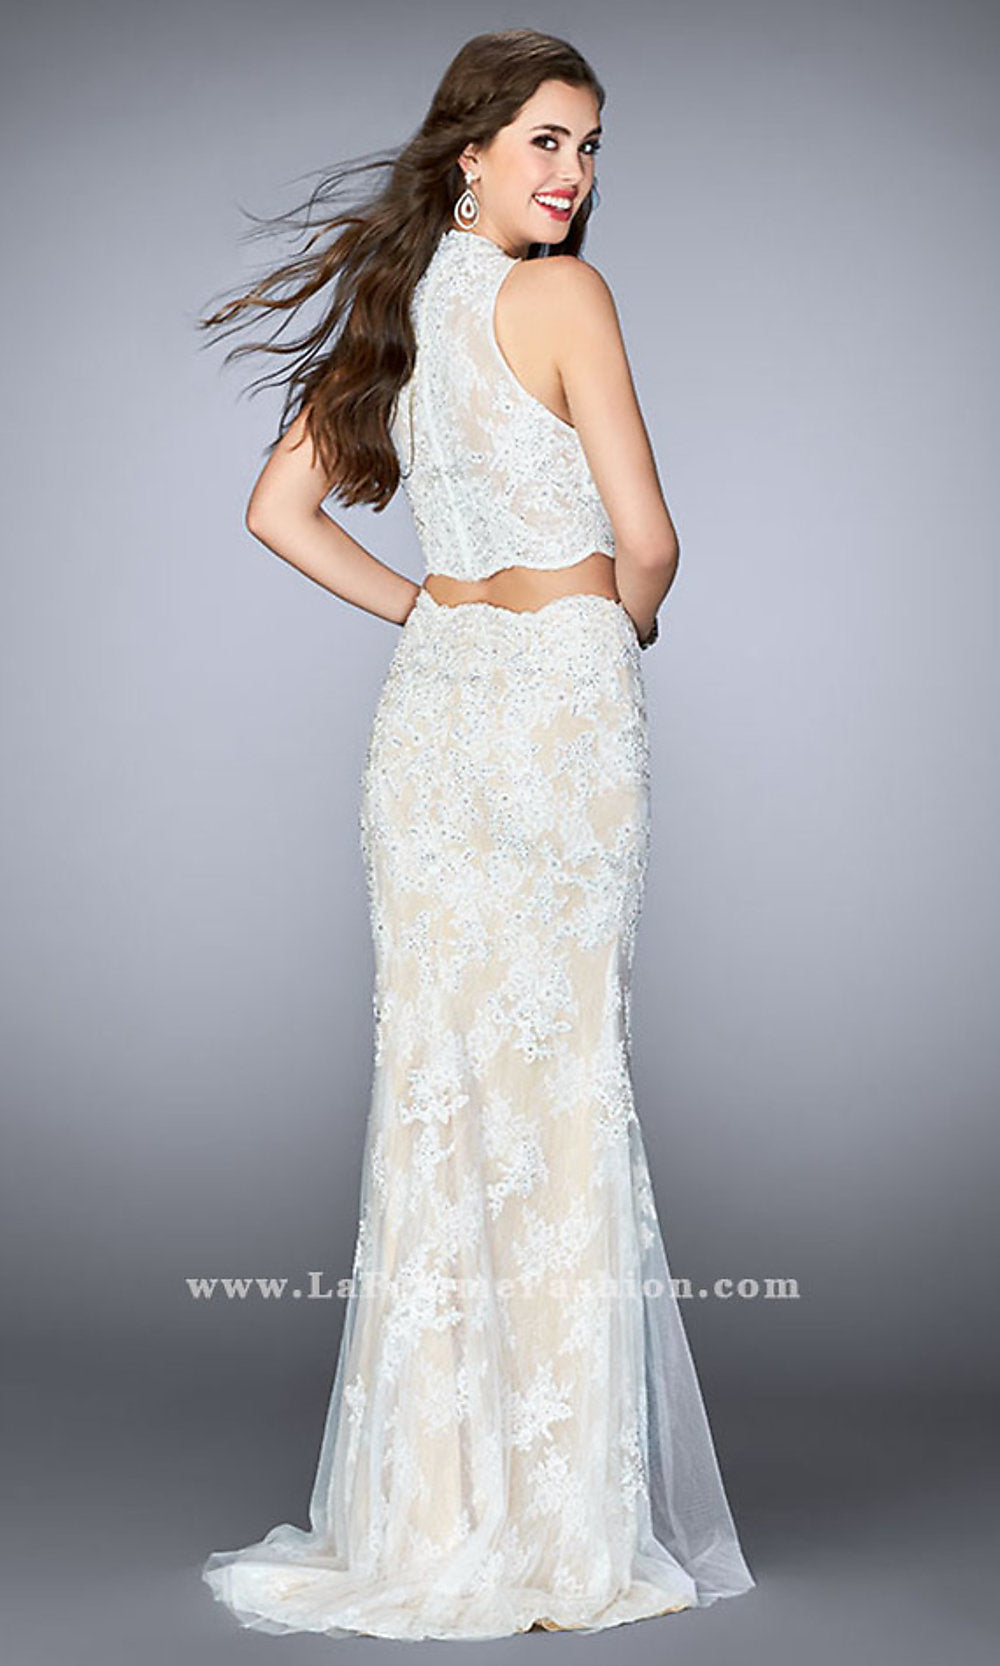  Two Piece High Neck Lace Prom Dress